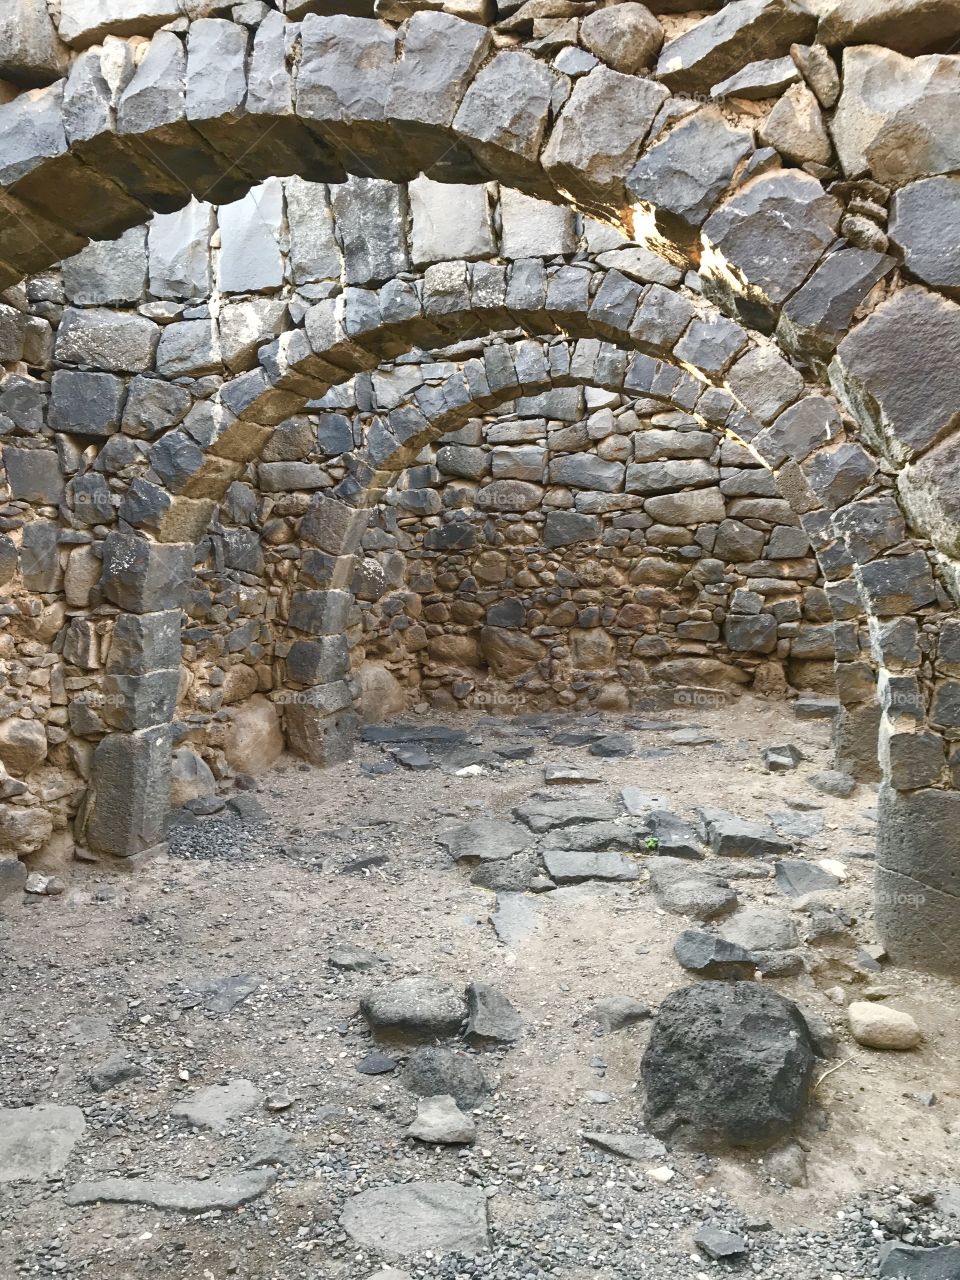 Ruins of an ancient home in the city of Korazin. This is the famous Korazin arch, which the builders of the city invented and perfected. 